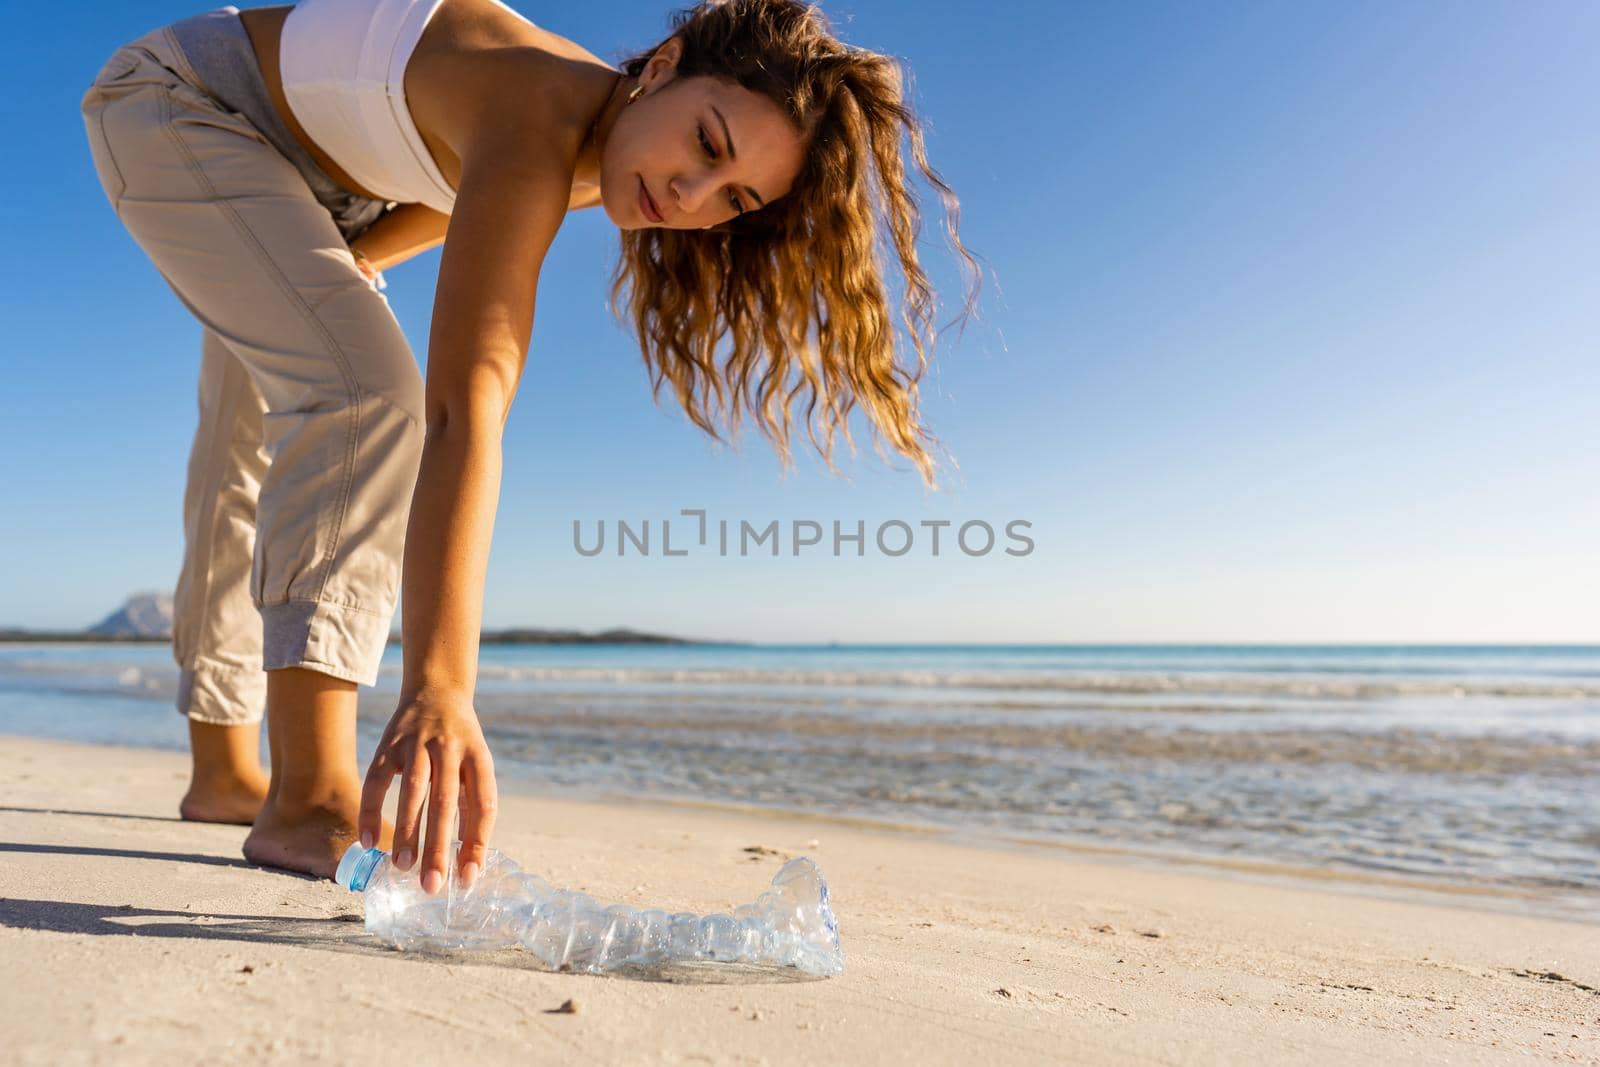 Young woman well educated and sensitive to environmental issues collects an empty plastic bottle abandoned on the seashore to preserve the ocean from plastic waste. Concept of taking care of nature by robbyfontanesi